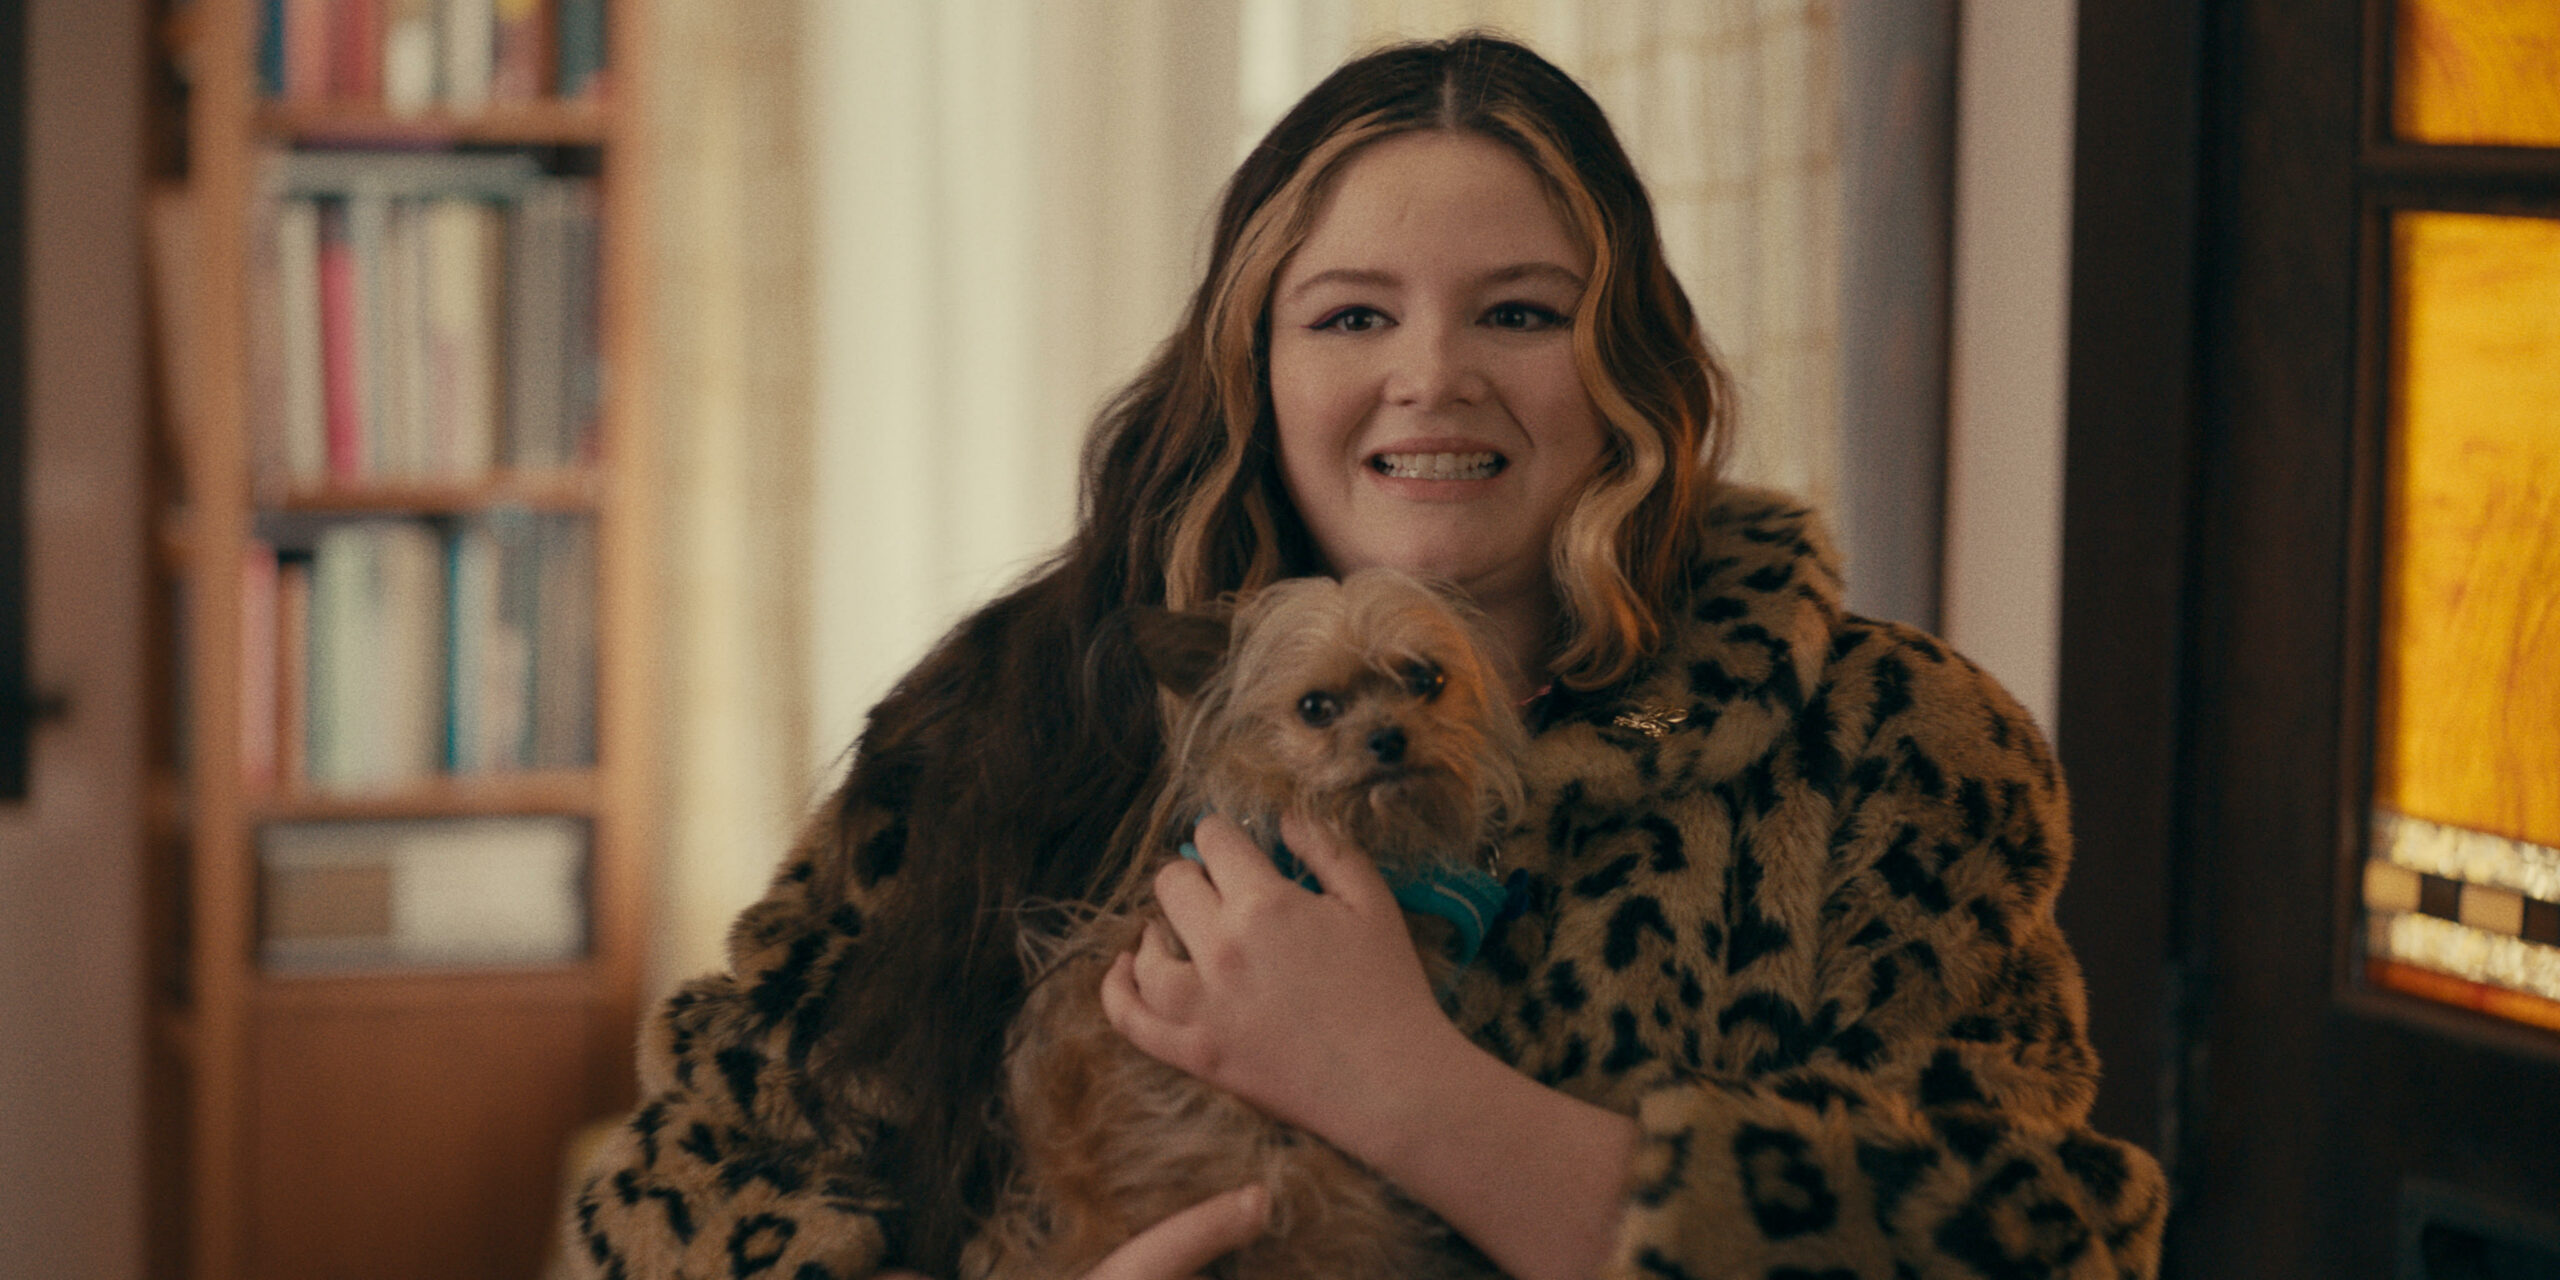 A woman wearing a faux fur coat smiles awkwardly as she holds a small dog